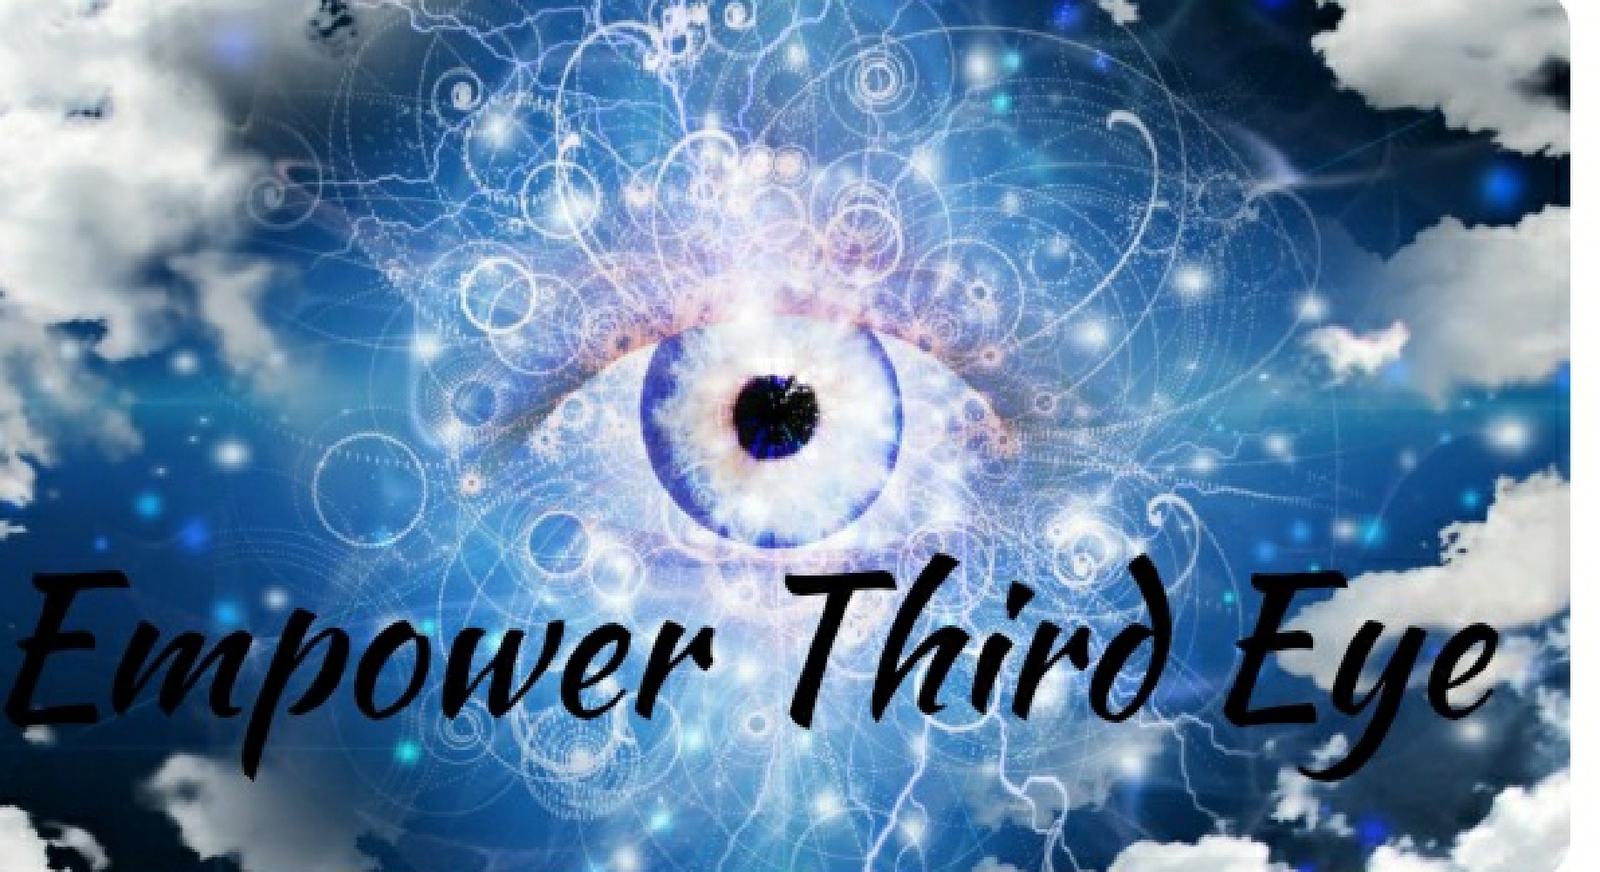 Primary image for Empower Third Eye